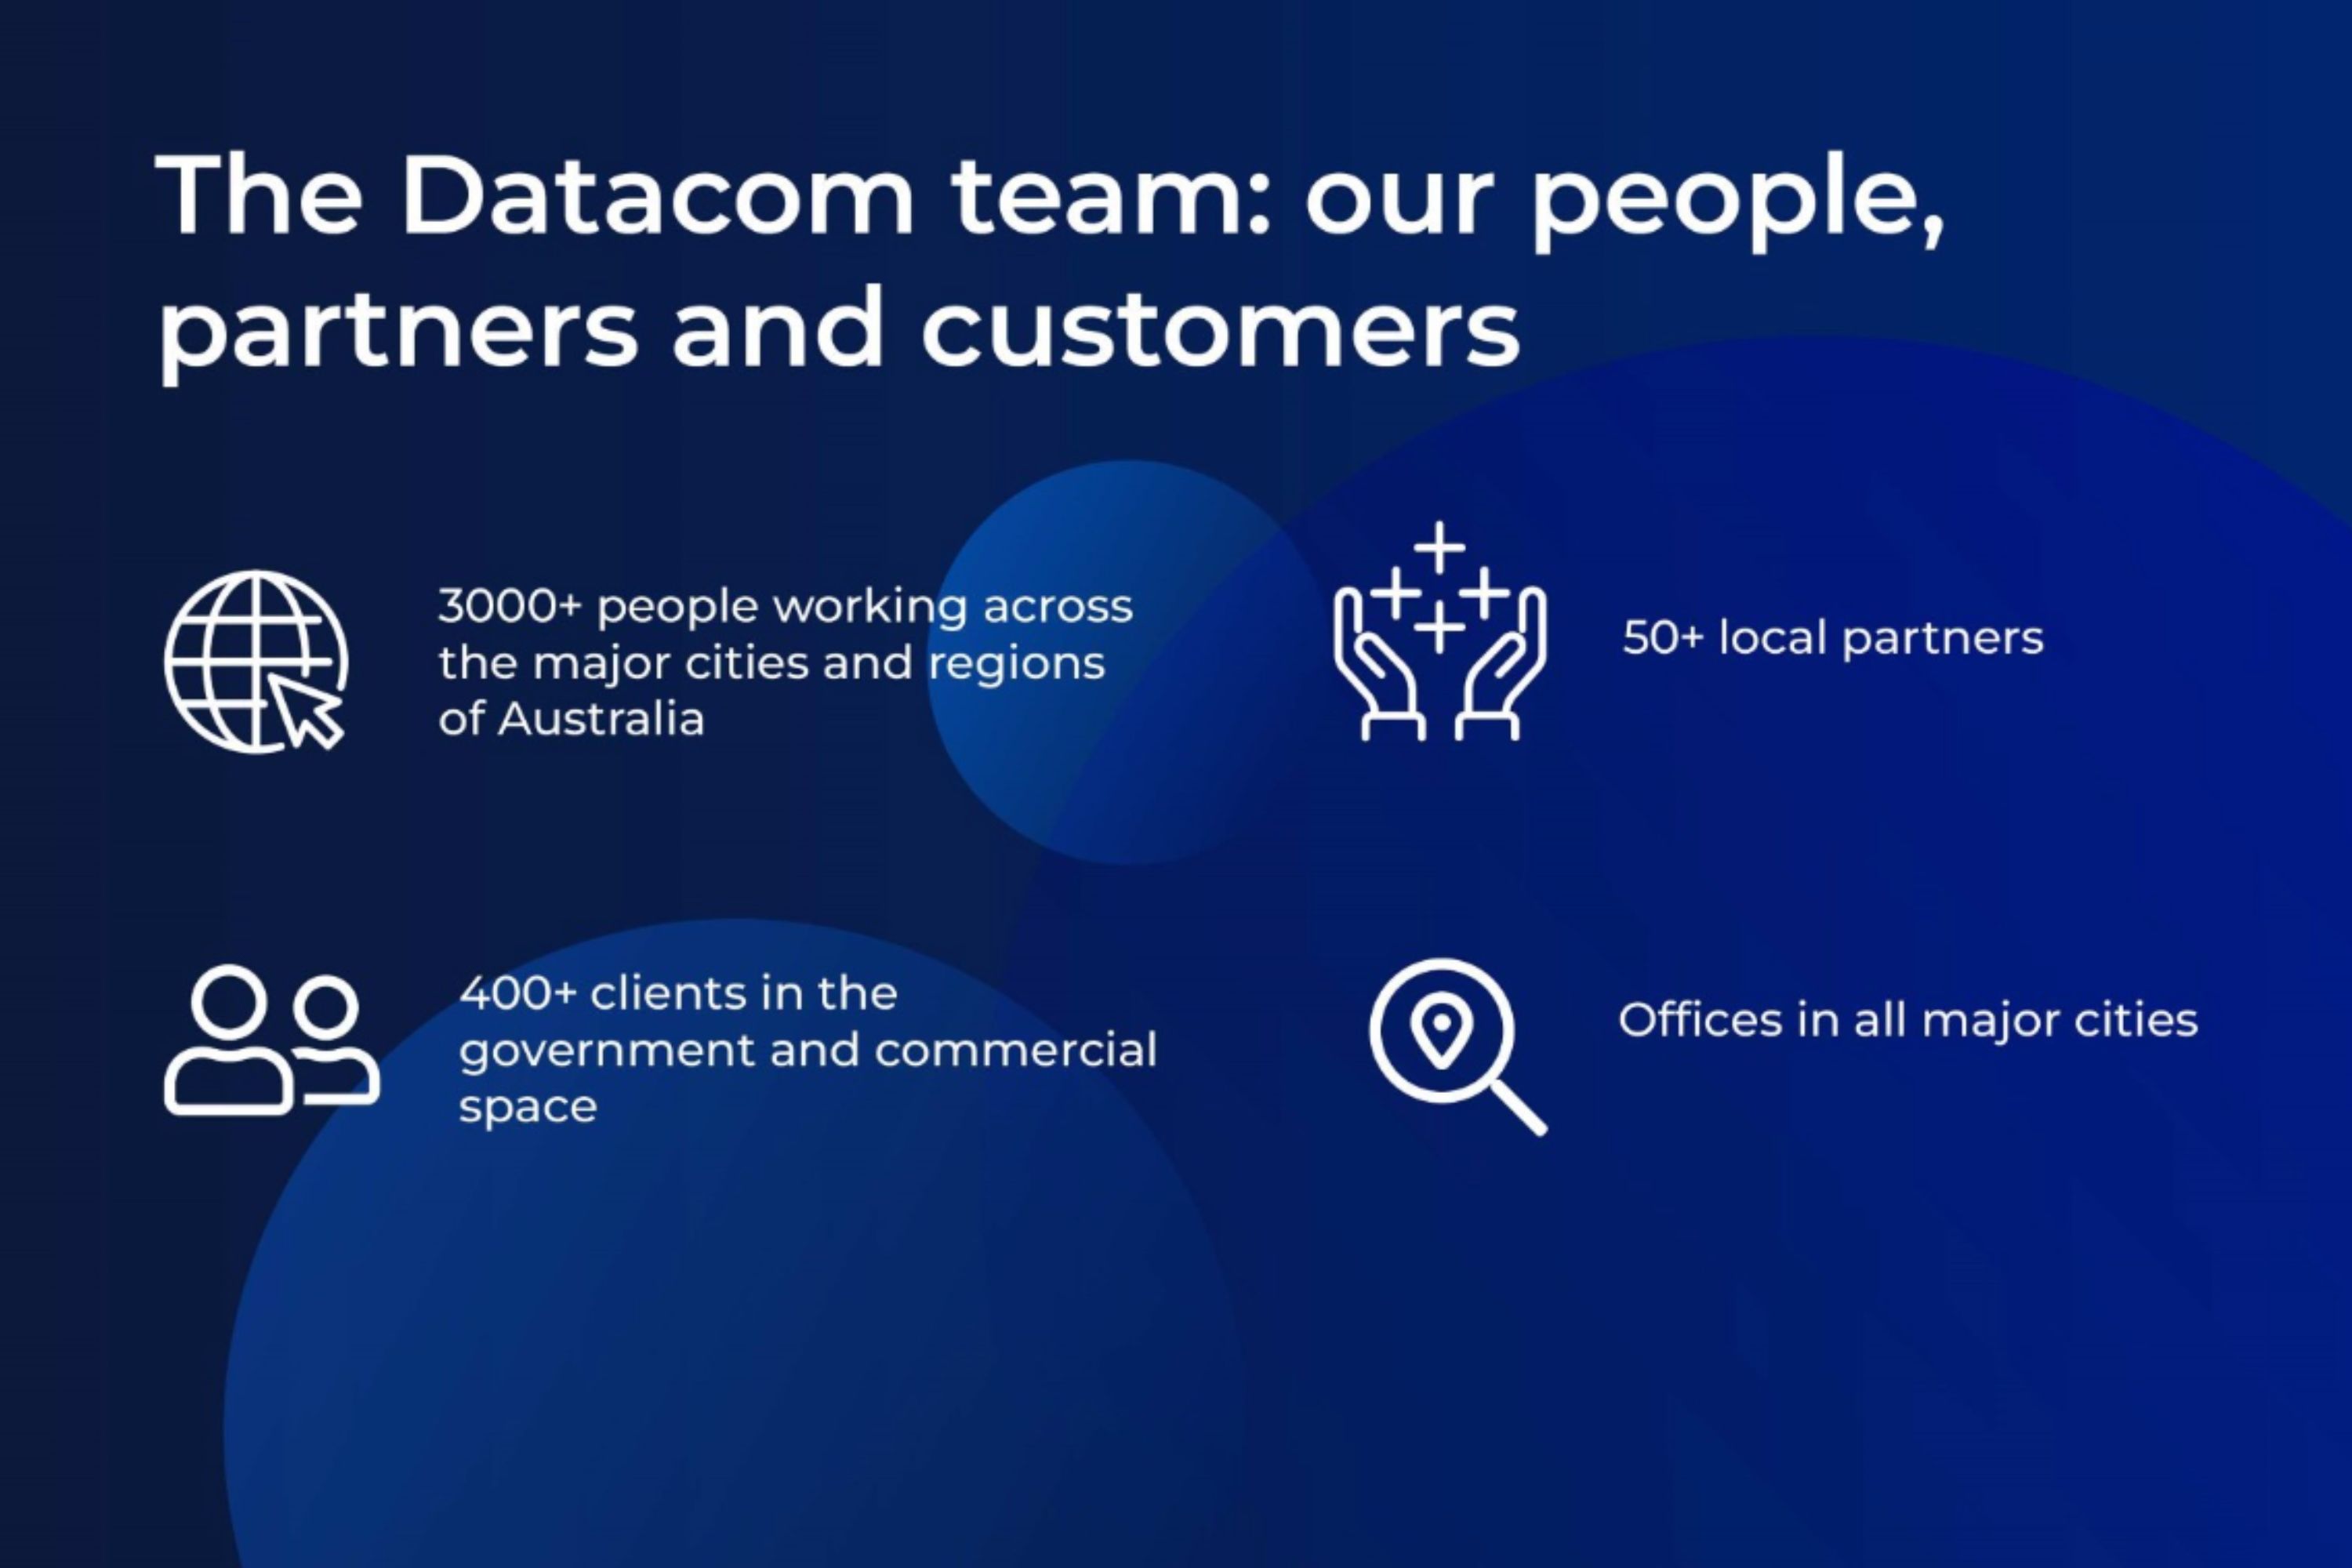 A slide providing an overview of Datacom - our people, partners and customers.